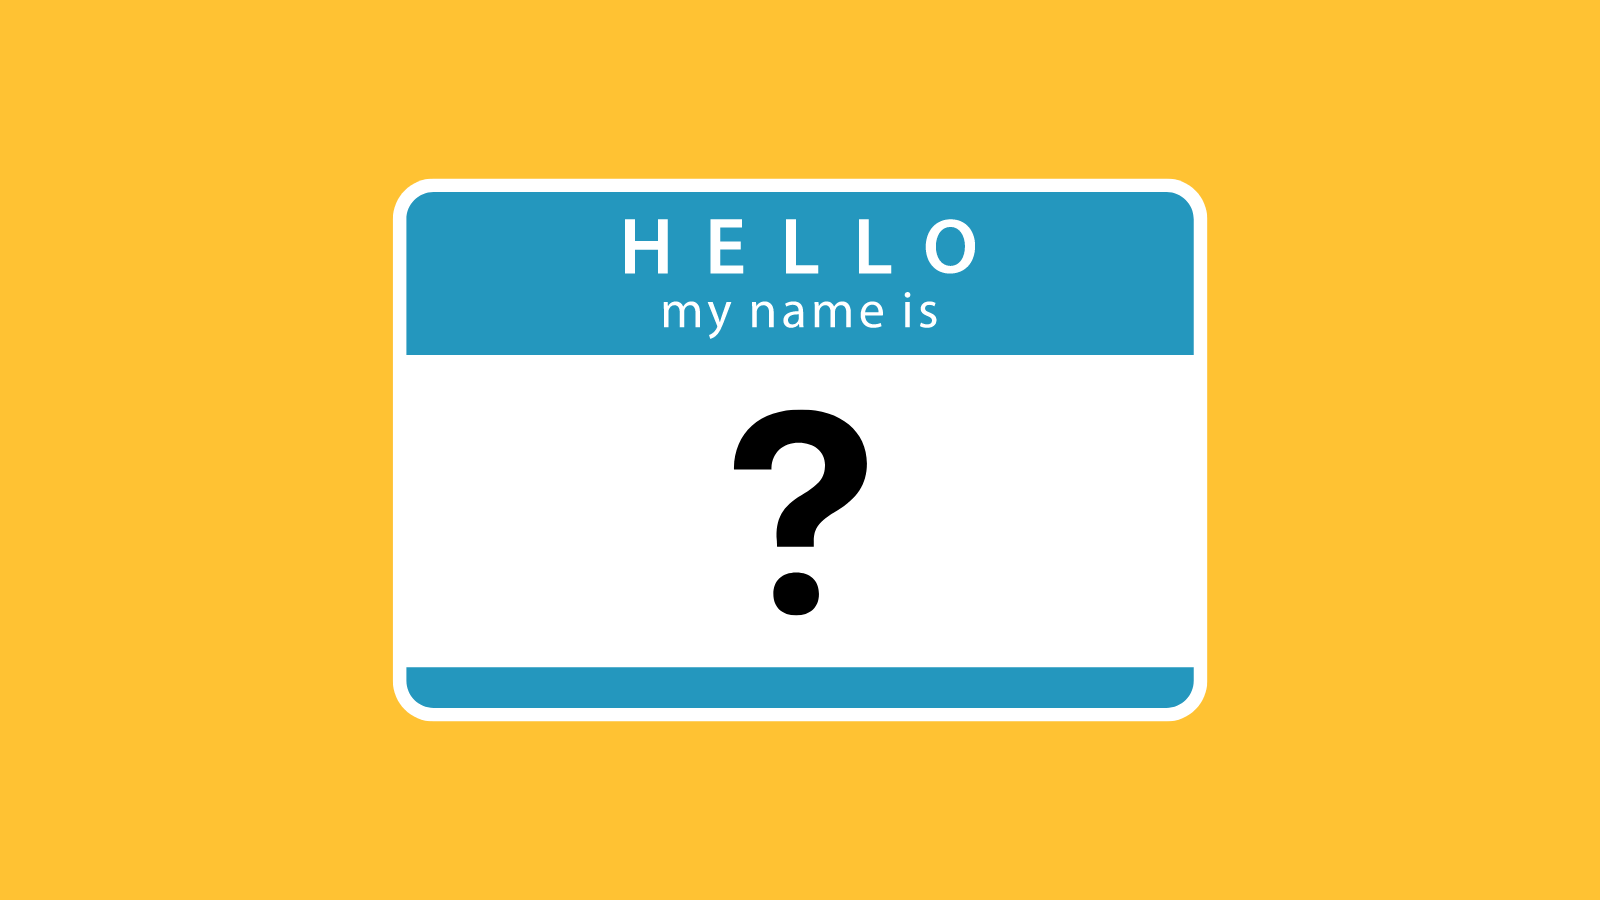 A name tag with a question mark